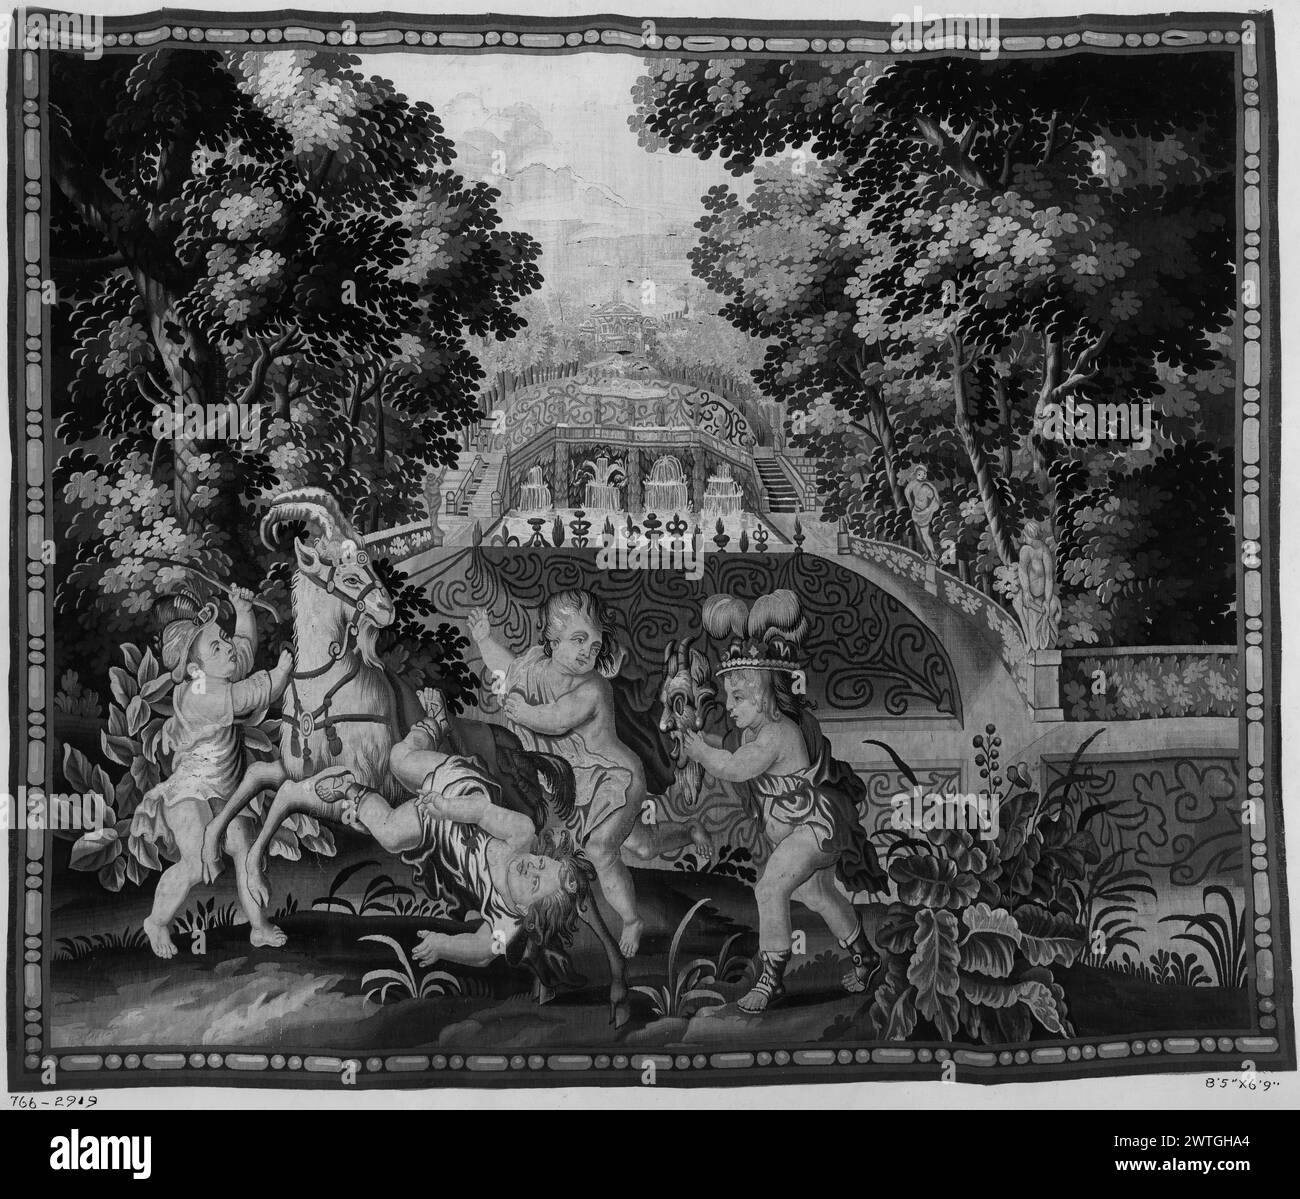 Bacchanalian children. unknown c. 1690 Tapestry Dimensions: H 6'9" x W 8'5" Tapestry Materials/Techniques: unknown Culture: English Weaving Center: Mortlake Ownership History: French & Co. purchased from De Souhami 5/5/1916. 4 boys playing with goat 1 tumbling off, 1 wears Indian-style headdress & holds mask (foreground), stylized garden with fountains & architectural scene (background) (BRD) bead-&-reel molding Marillier discusses a set of 7 panels at Cotehele in which this tapestry matches the description (see pl. 10b). He also identifies 2 other copies: 1 belonged to Mrs. Fetherston-Godly, Stock Photo